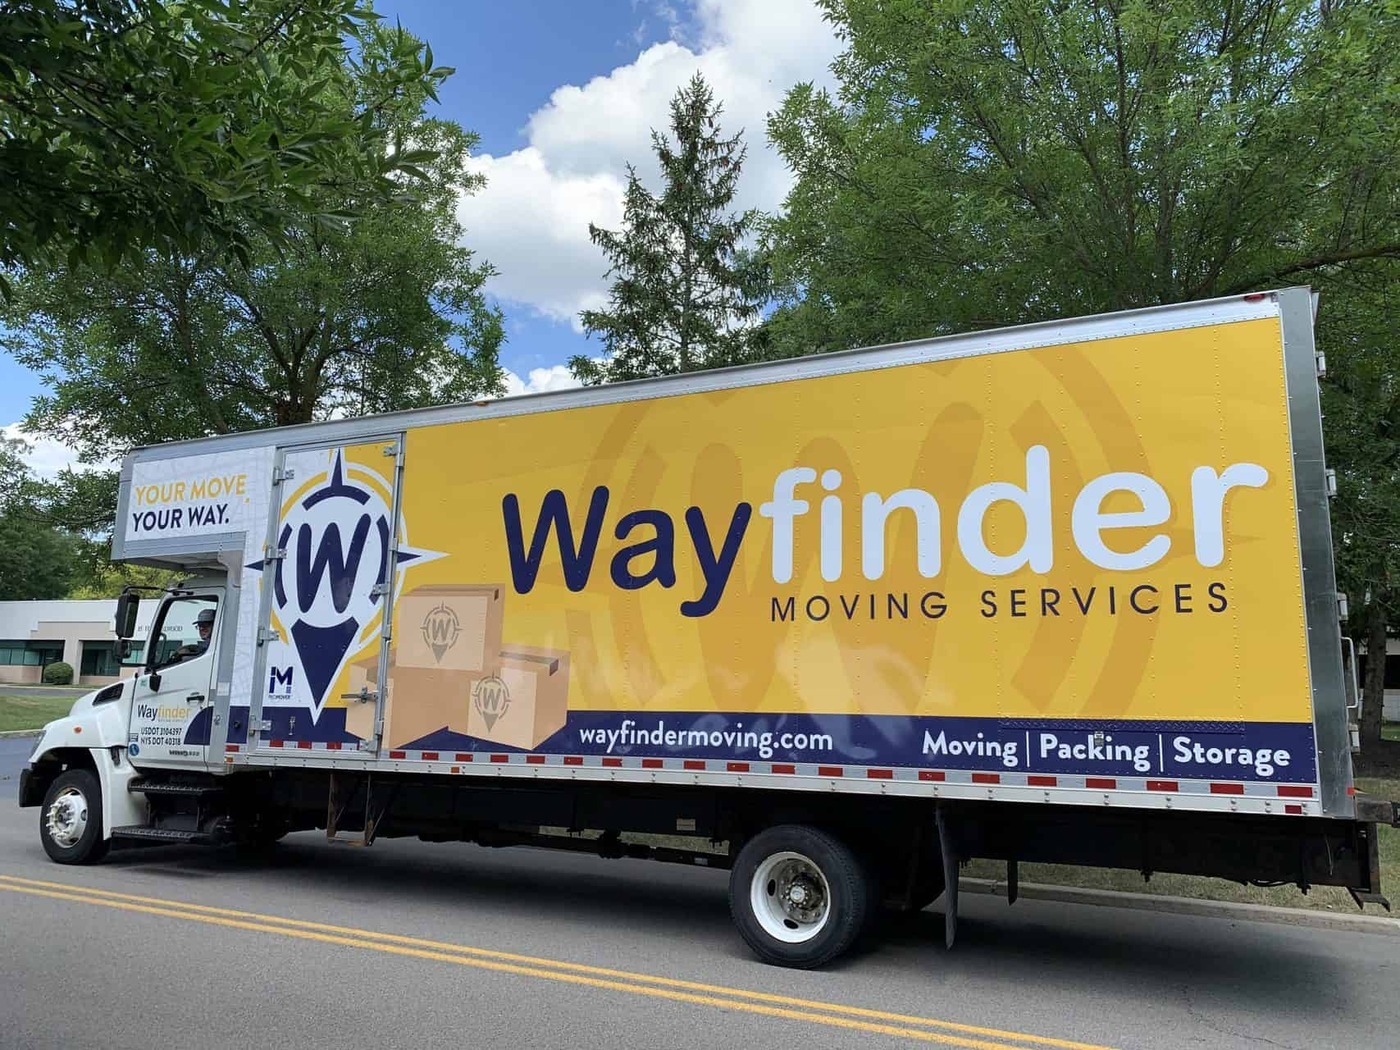 Wayfinder Moving & Storage, based in Buffalo, NY, has been a leader in the moving industry since its inception.